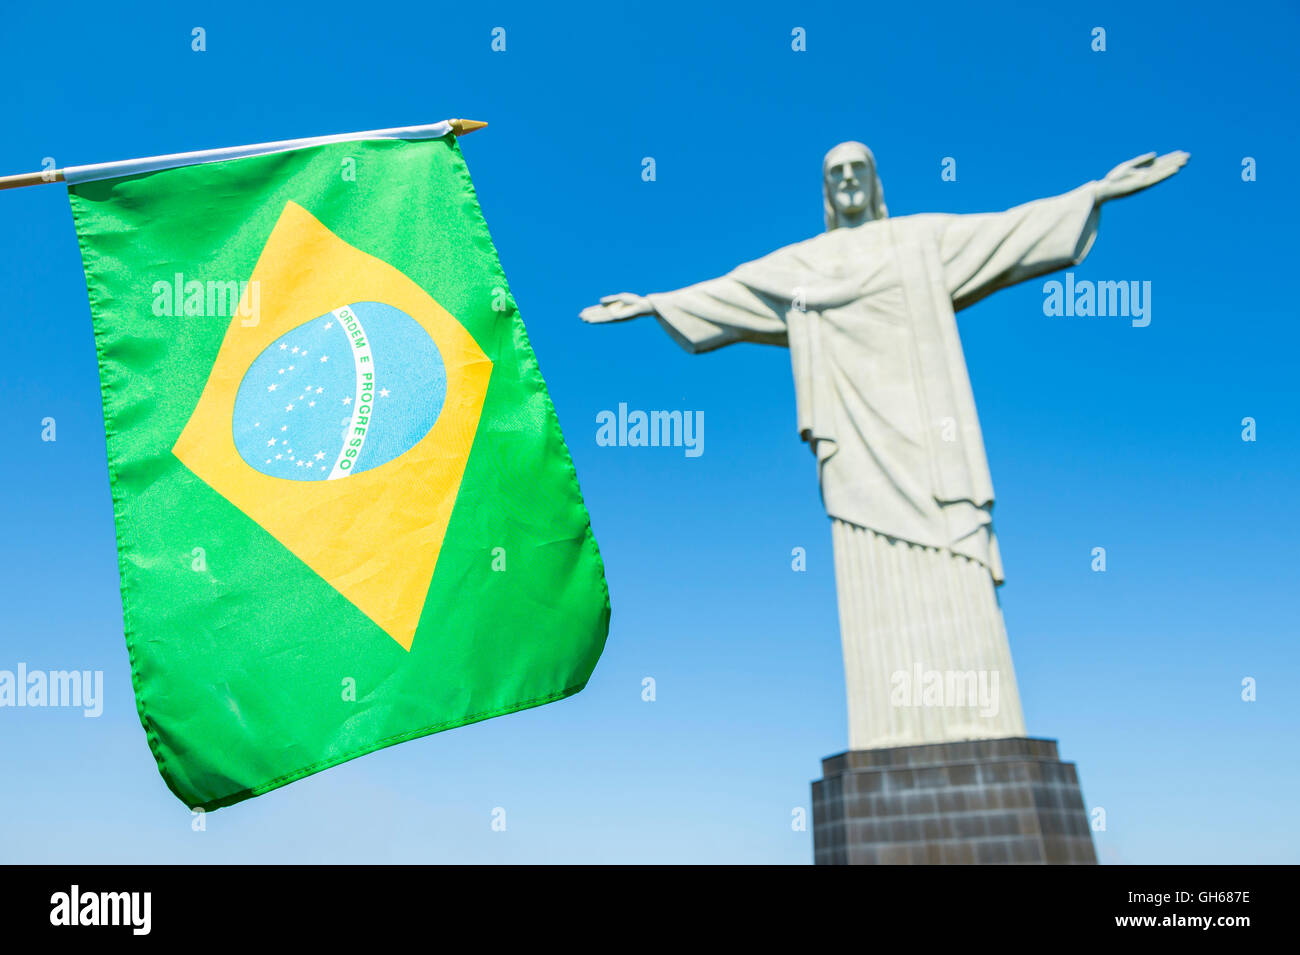 RIO DE JANEIRO - MARCH 21, 2016: Brazilian flag waves in front of statue of Christ the Redeemer at Corcovado. Stock Photo